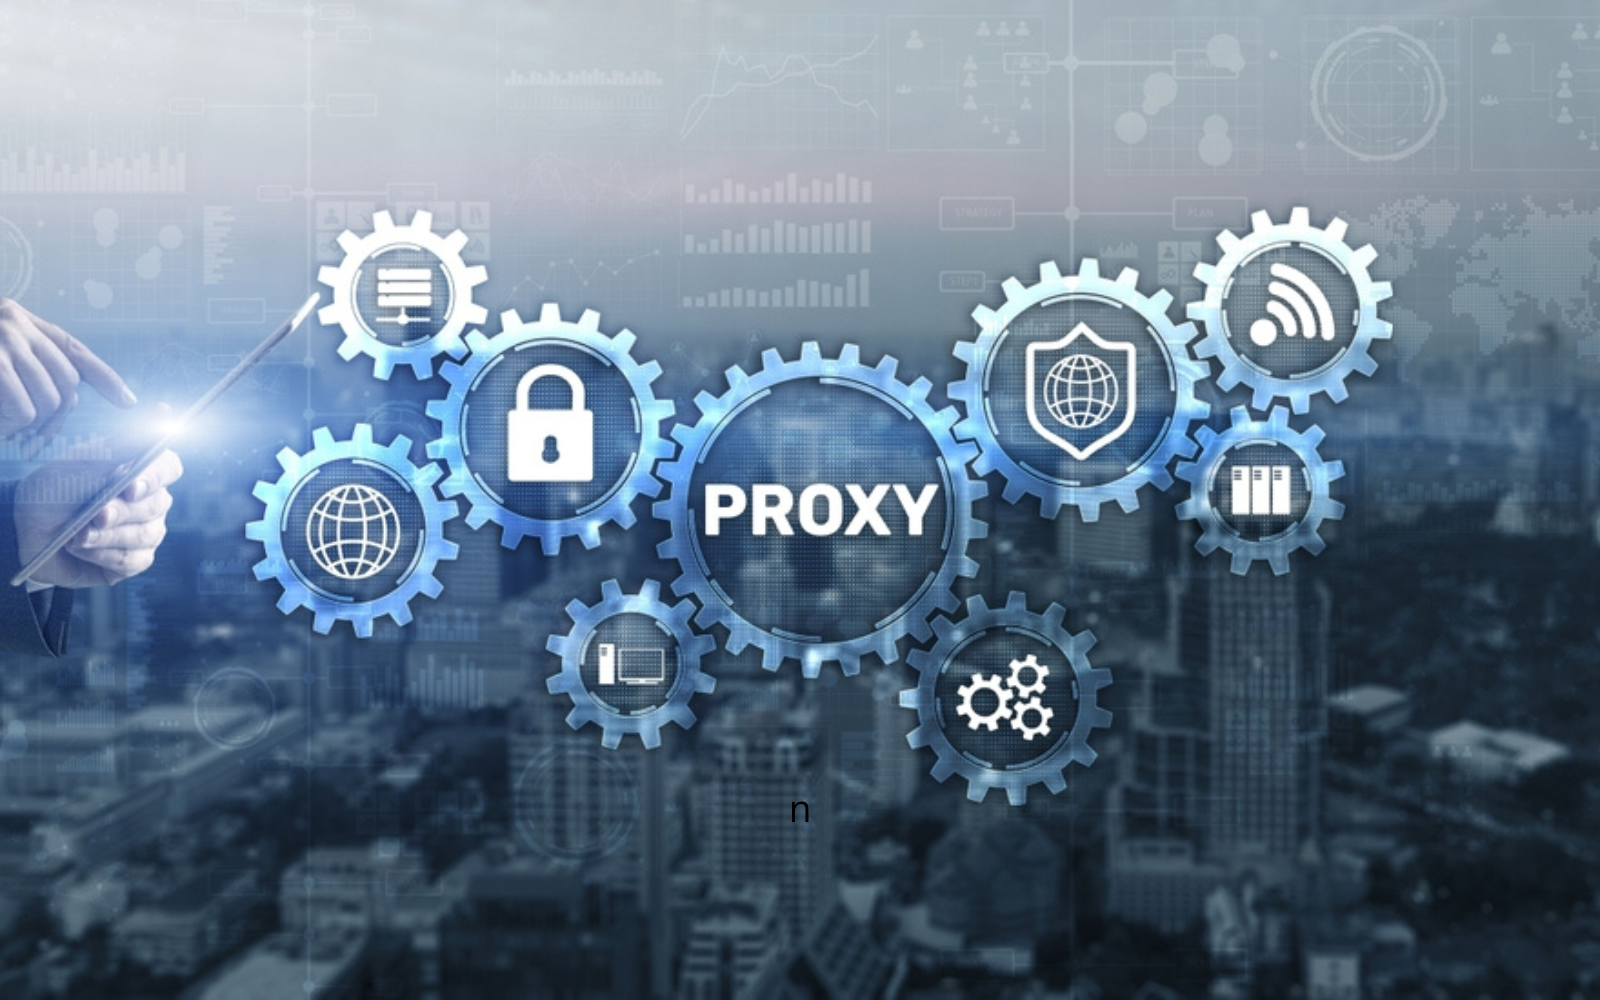 Google Testing IP Proxies: What This Means & How You May Be Impacted via @sejournal, @navahf